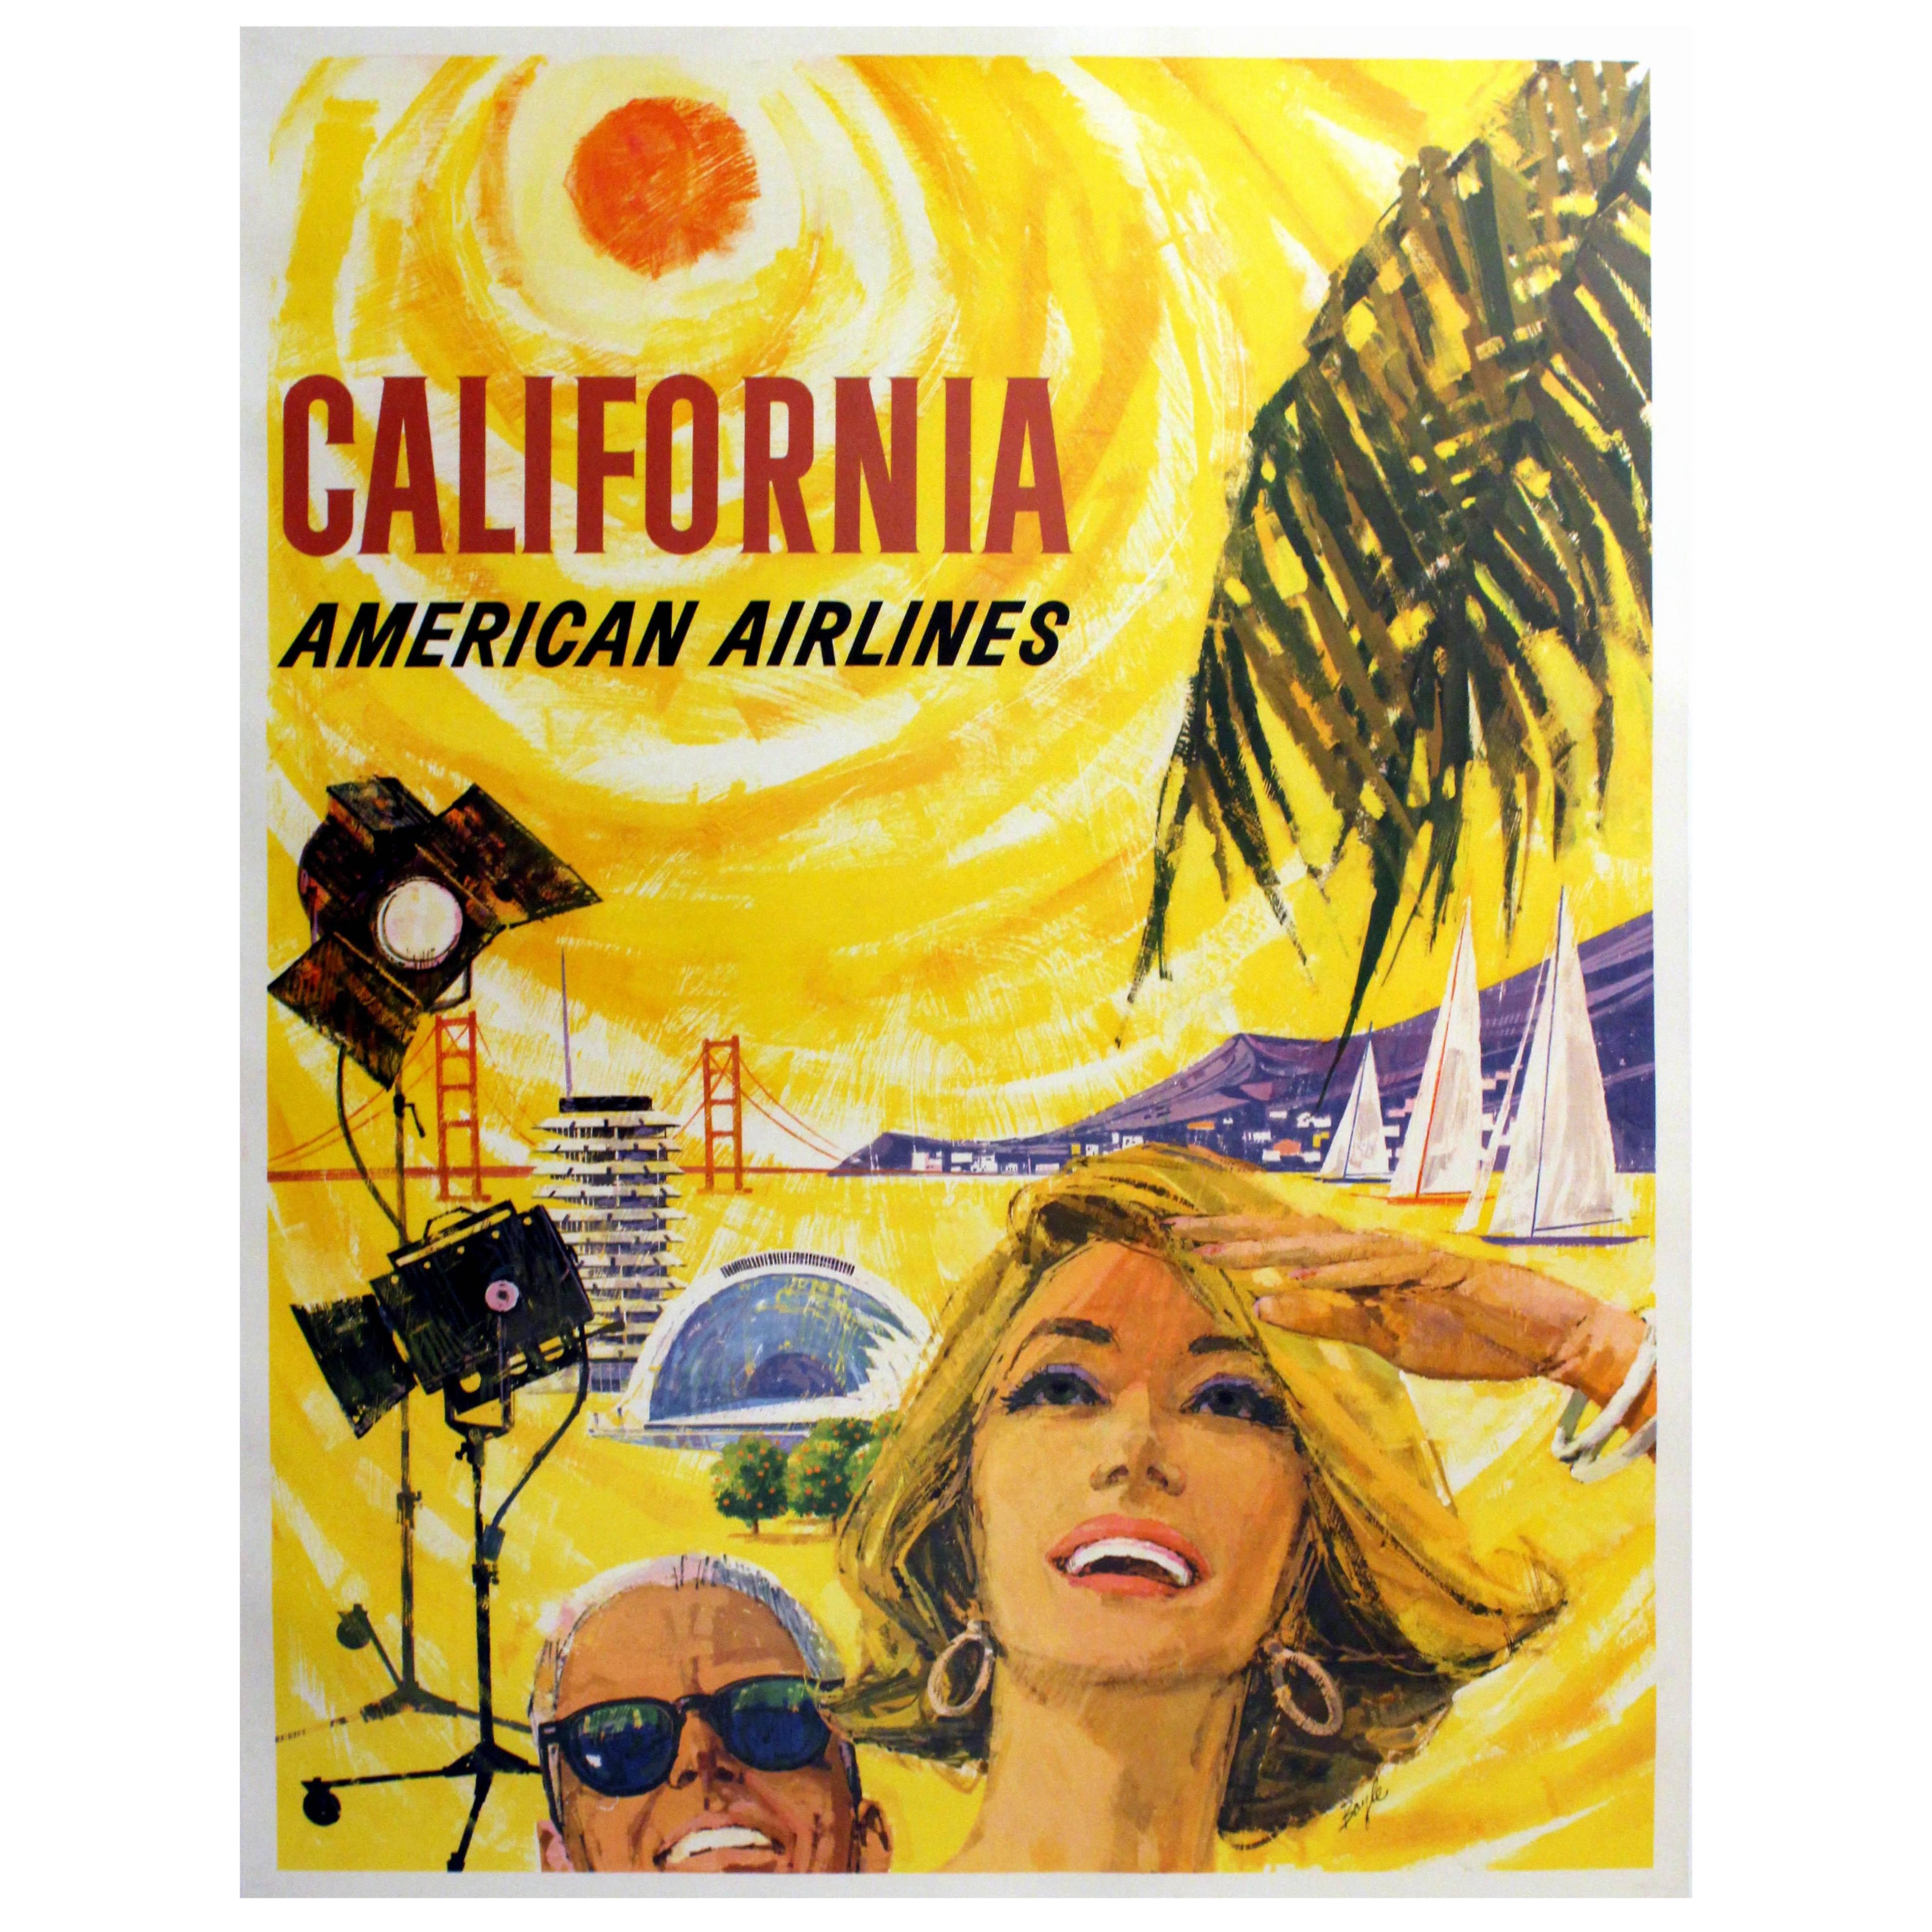 Original Vintage 1950s Travel Poster Advertising California by American Airlines